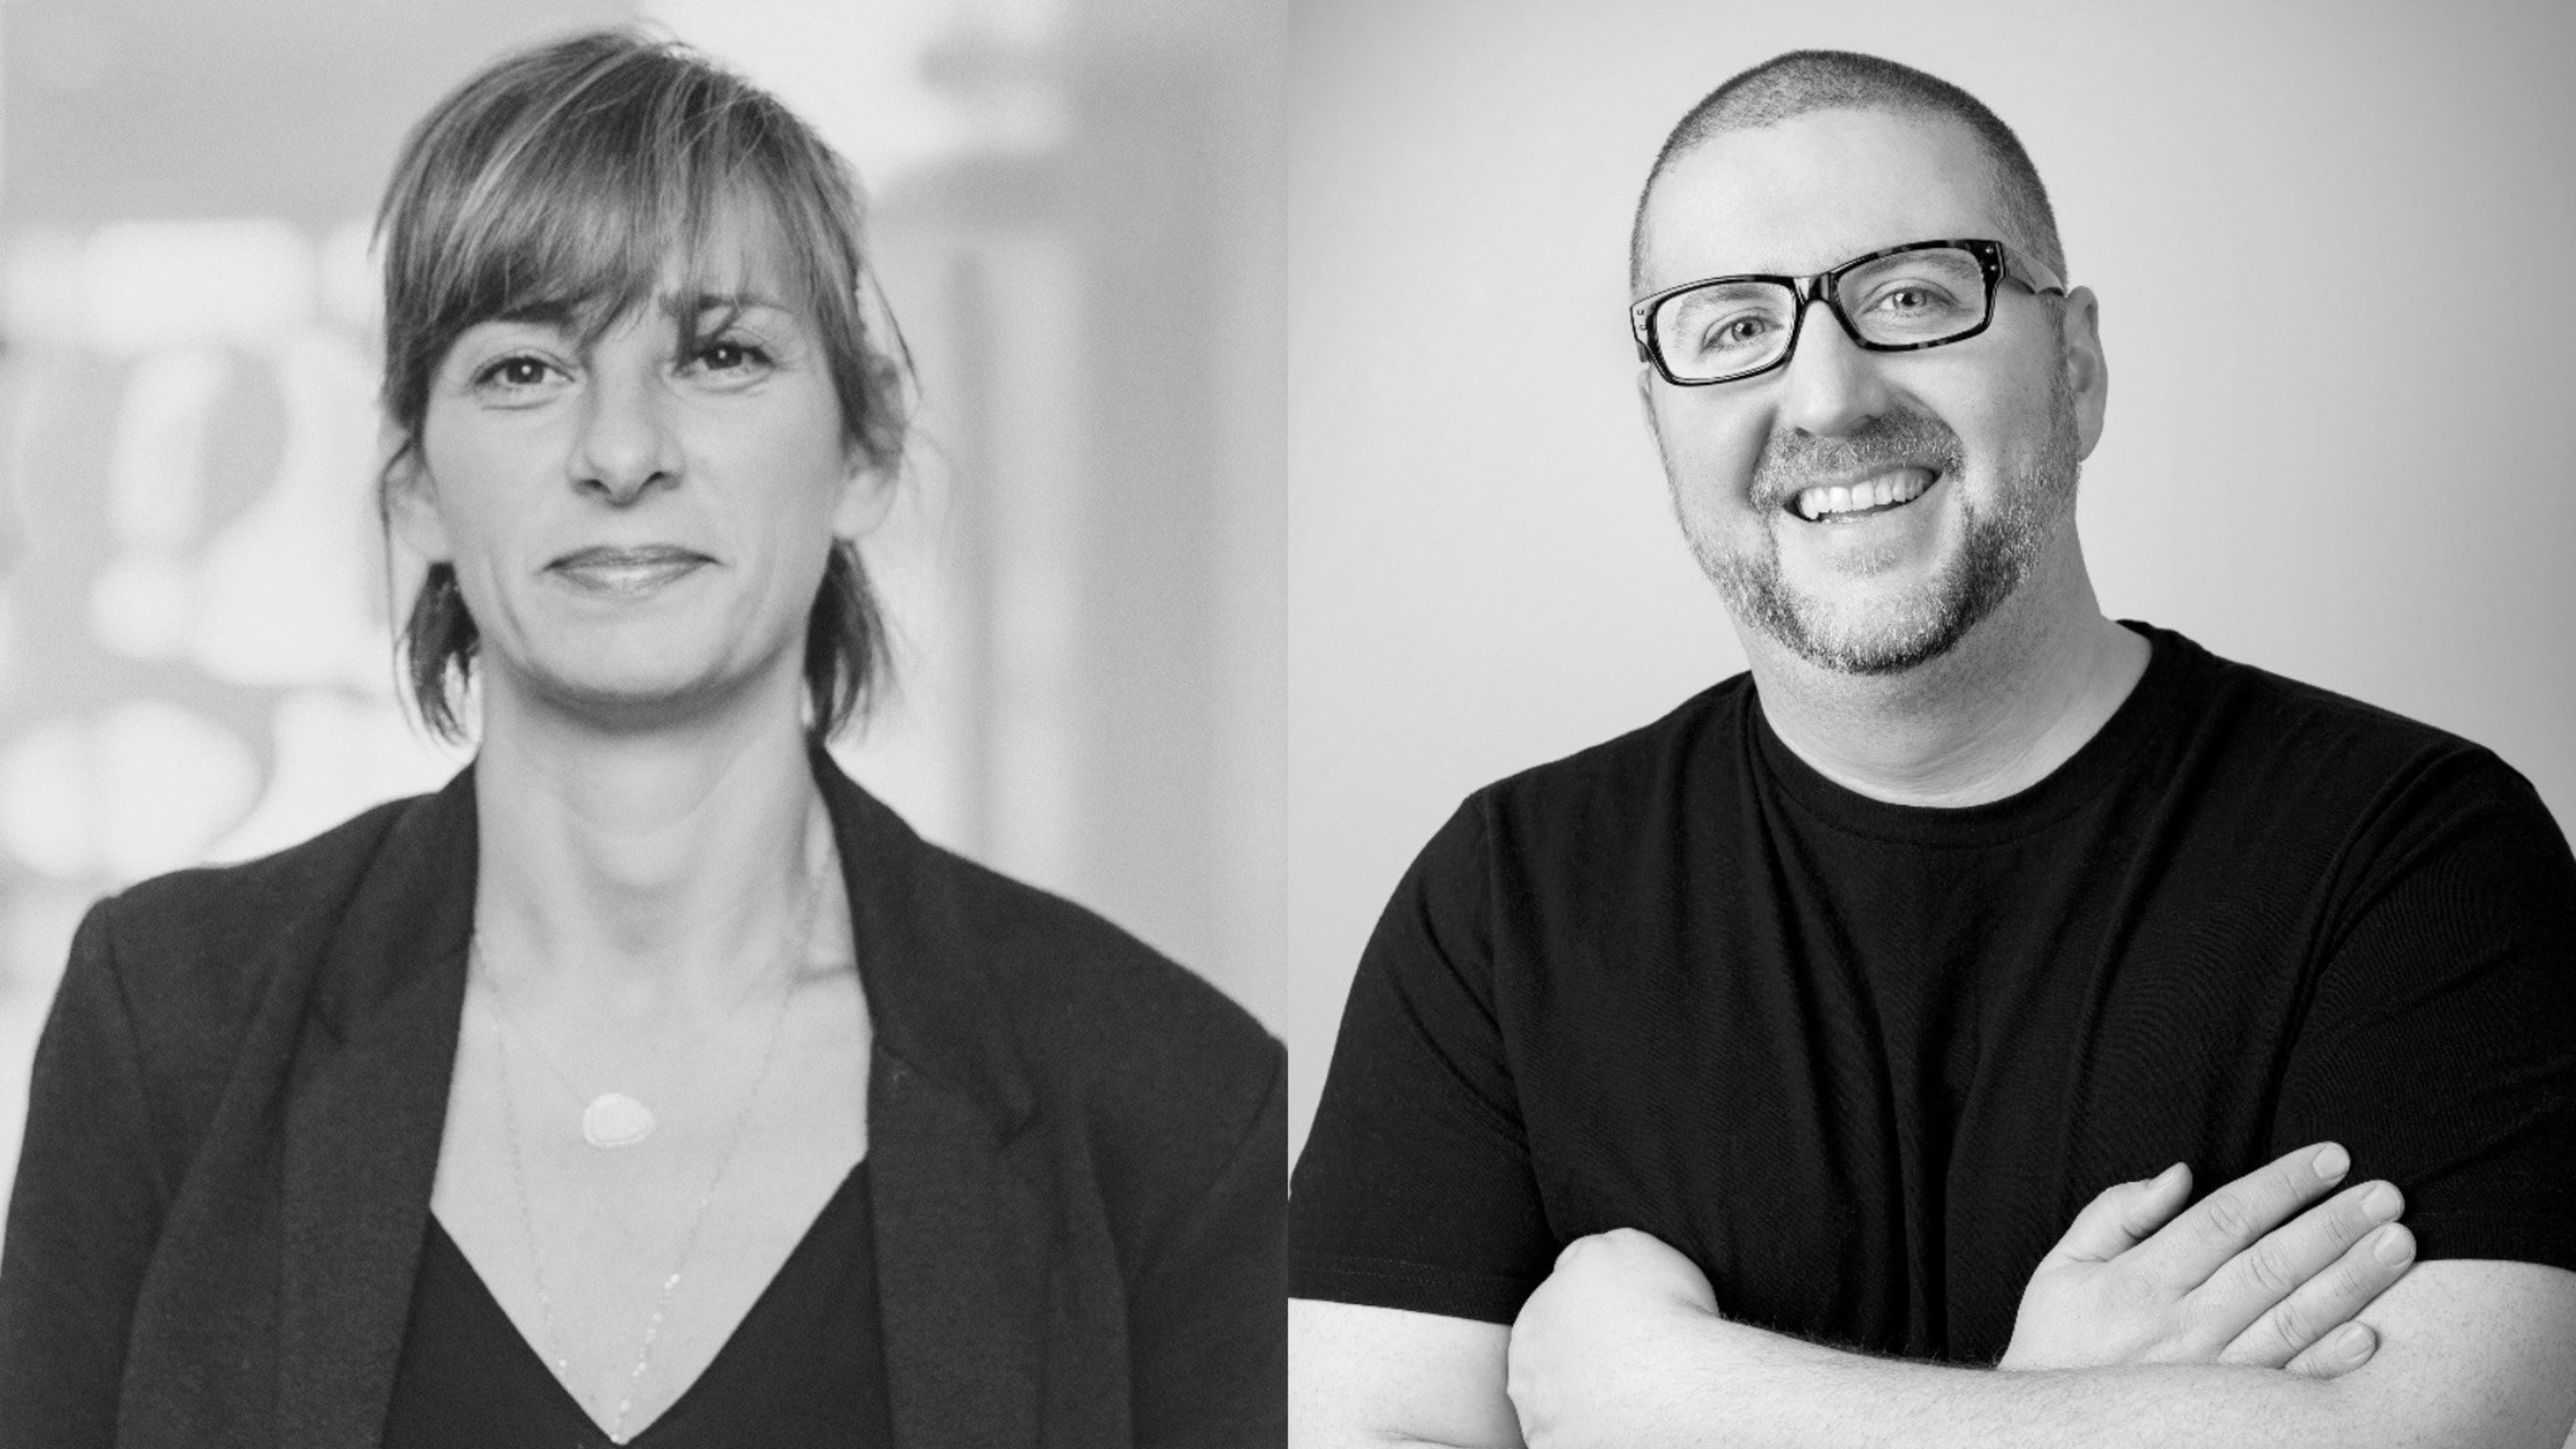 GTB (formerly known as Team Detroit, Blue Hive, and Retail First) promotes Sumer Friedrichs to SVP Director of Integrated Production and Christian Colasuonno to Director of Digital Production.  Newly branded in May 2016, GTB is one of WPP’s agency teams.